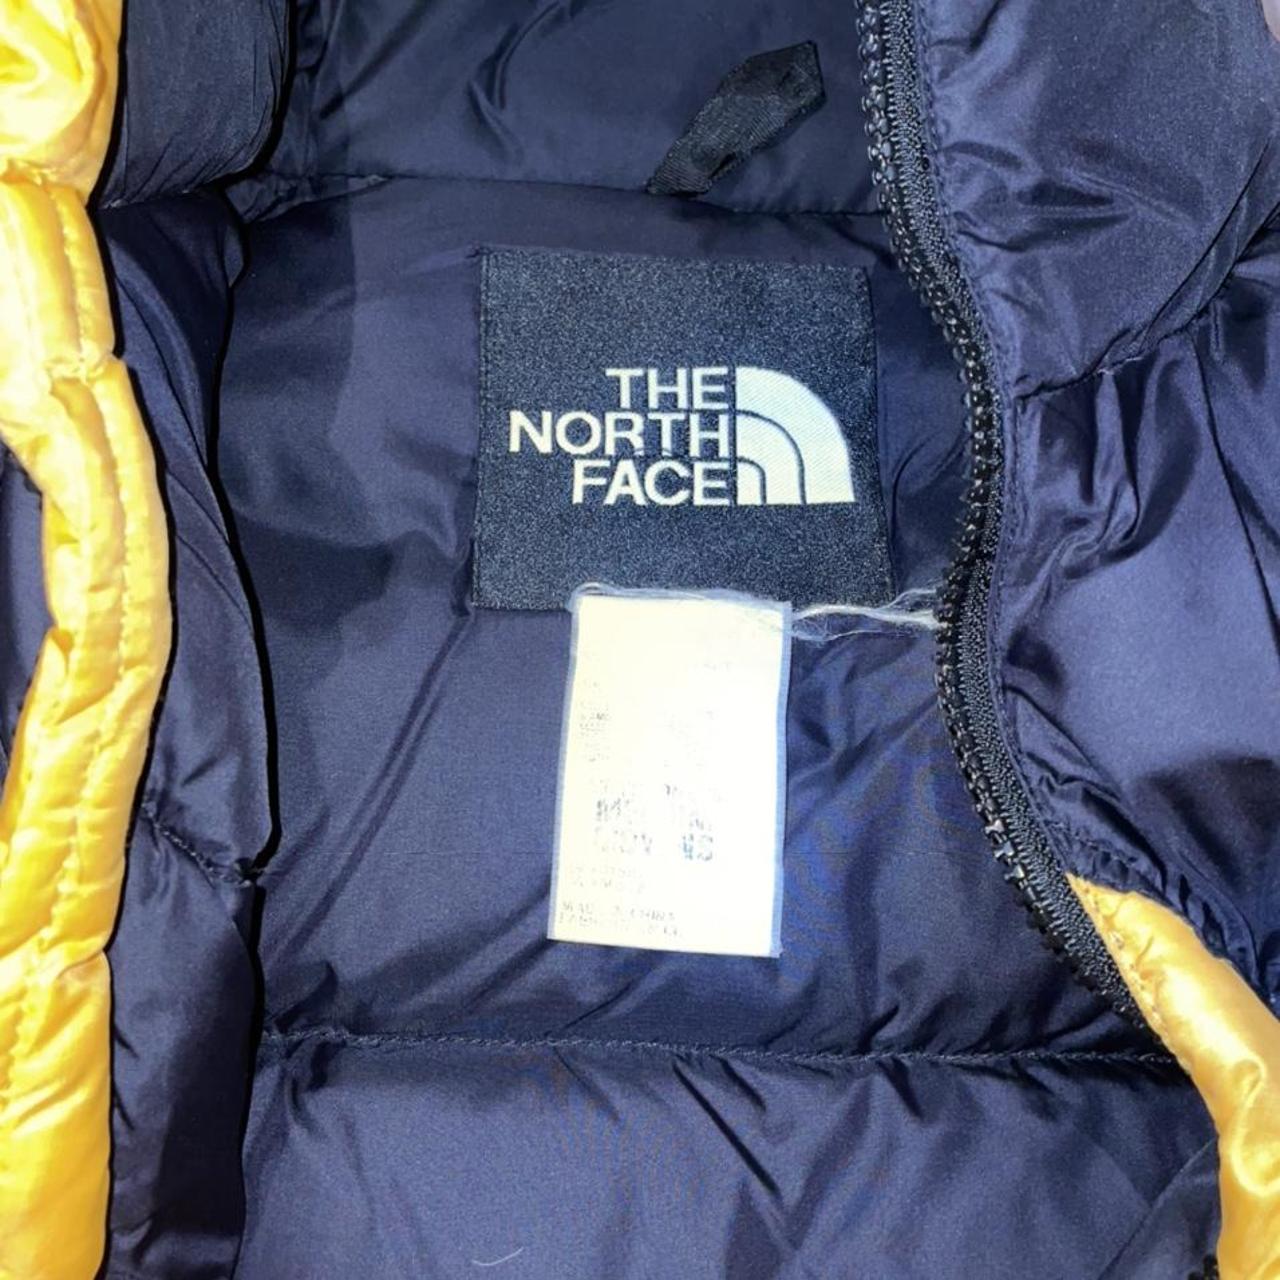 The North Face Men's Black and Yellow Jacket | Depop